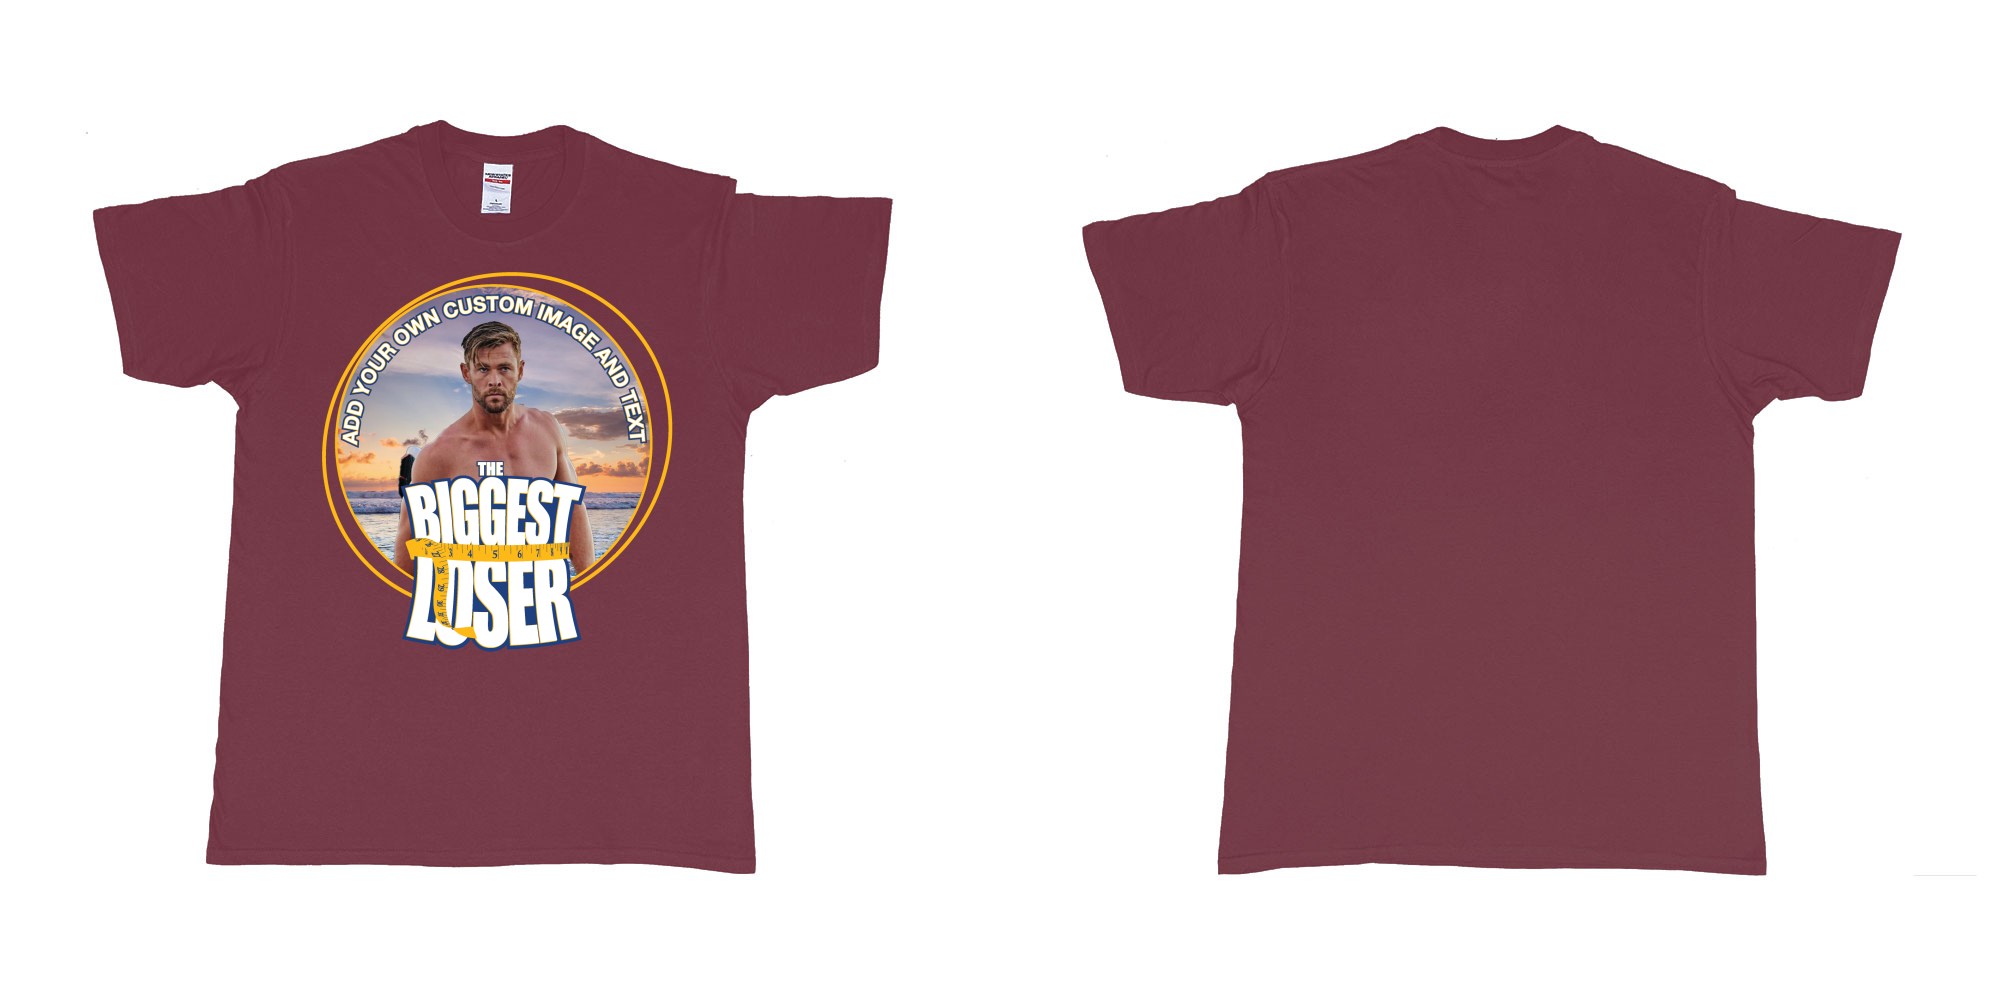 Custom tshirt design the biggest loser logo custom image funny tshirt design in fabric color marron choice your own text made in Bali by The Pirate Way